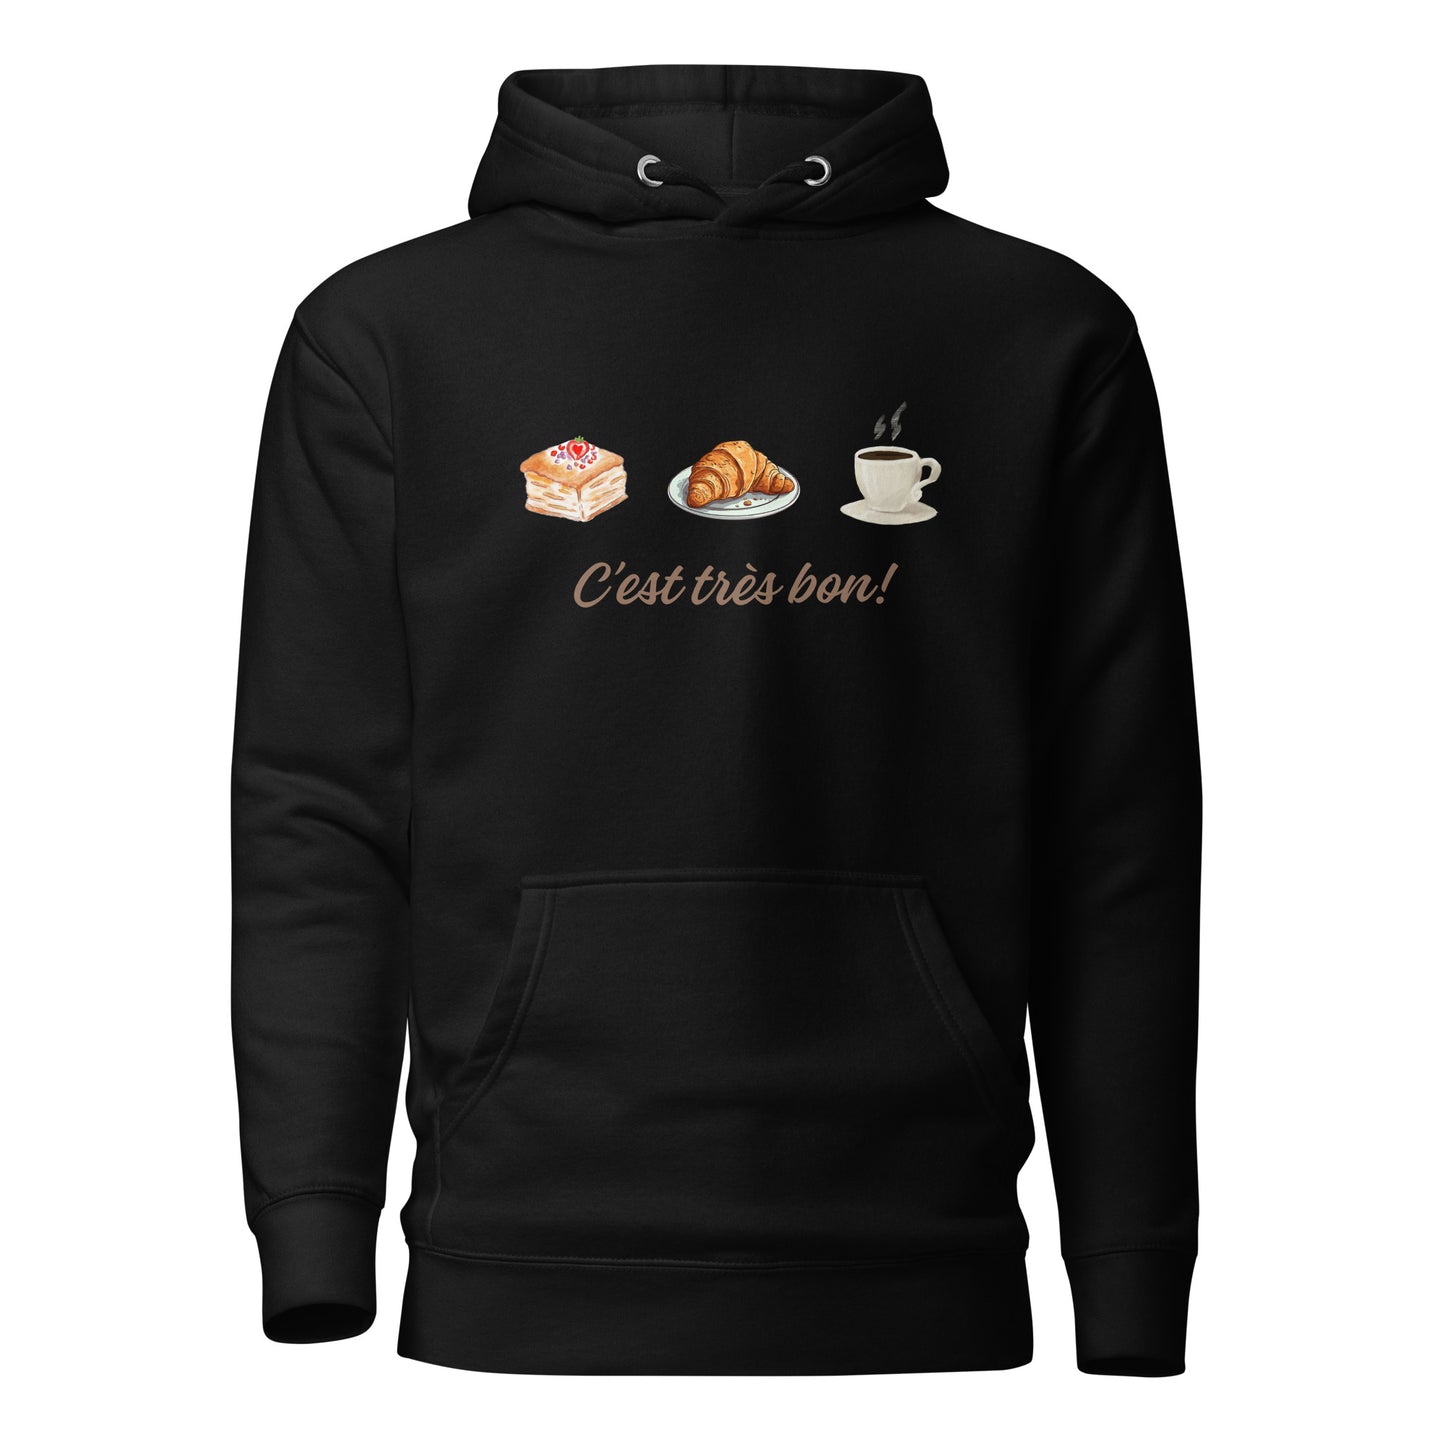 Unisex hoodie| Breakfast hoodie| croissant | viennoiserie | food | casual | relax | cappuccino | perfect gift | its very good